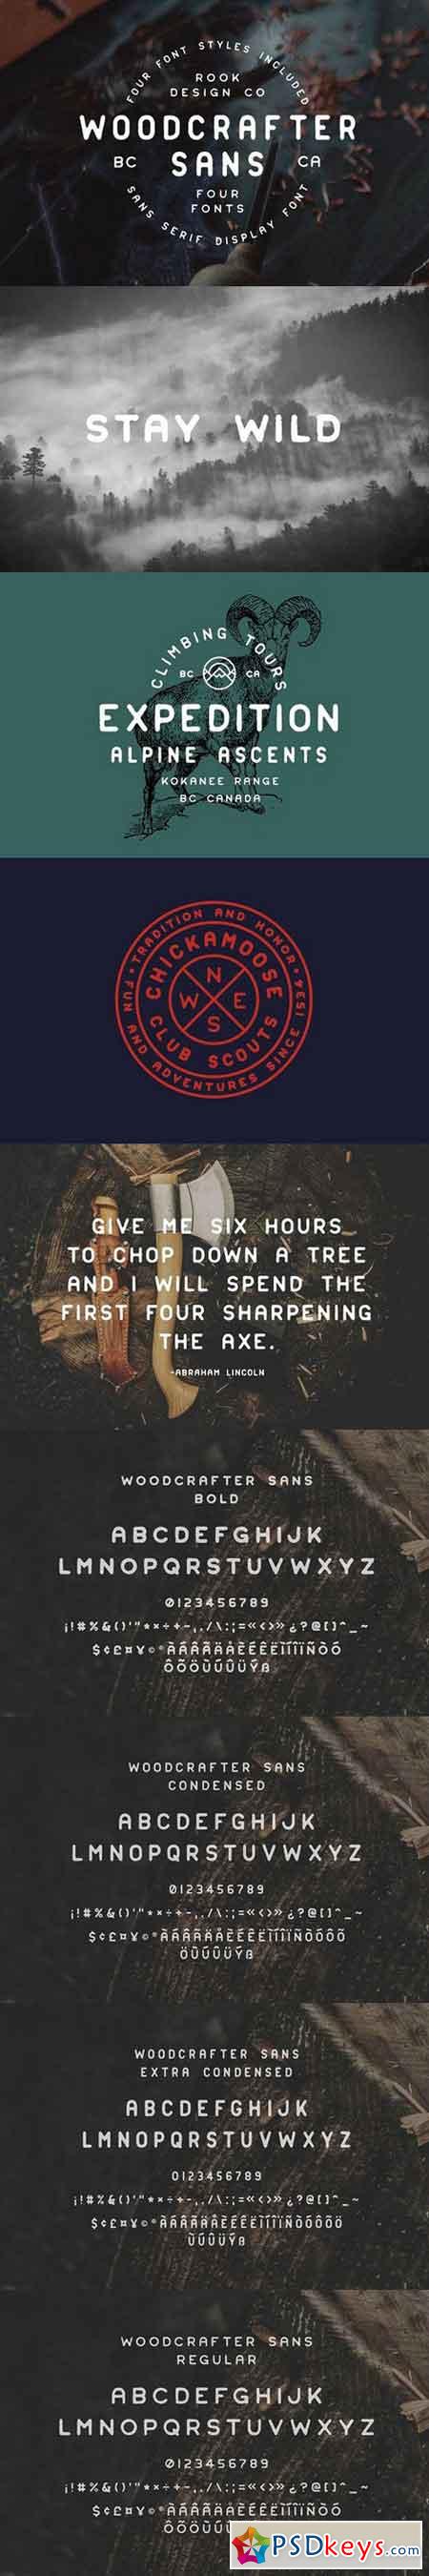 Woodcrafter Sans - 4 Font Family 1351417